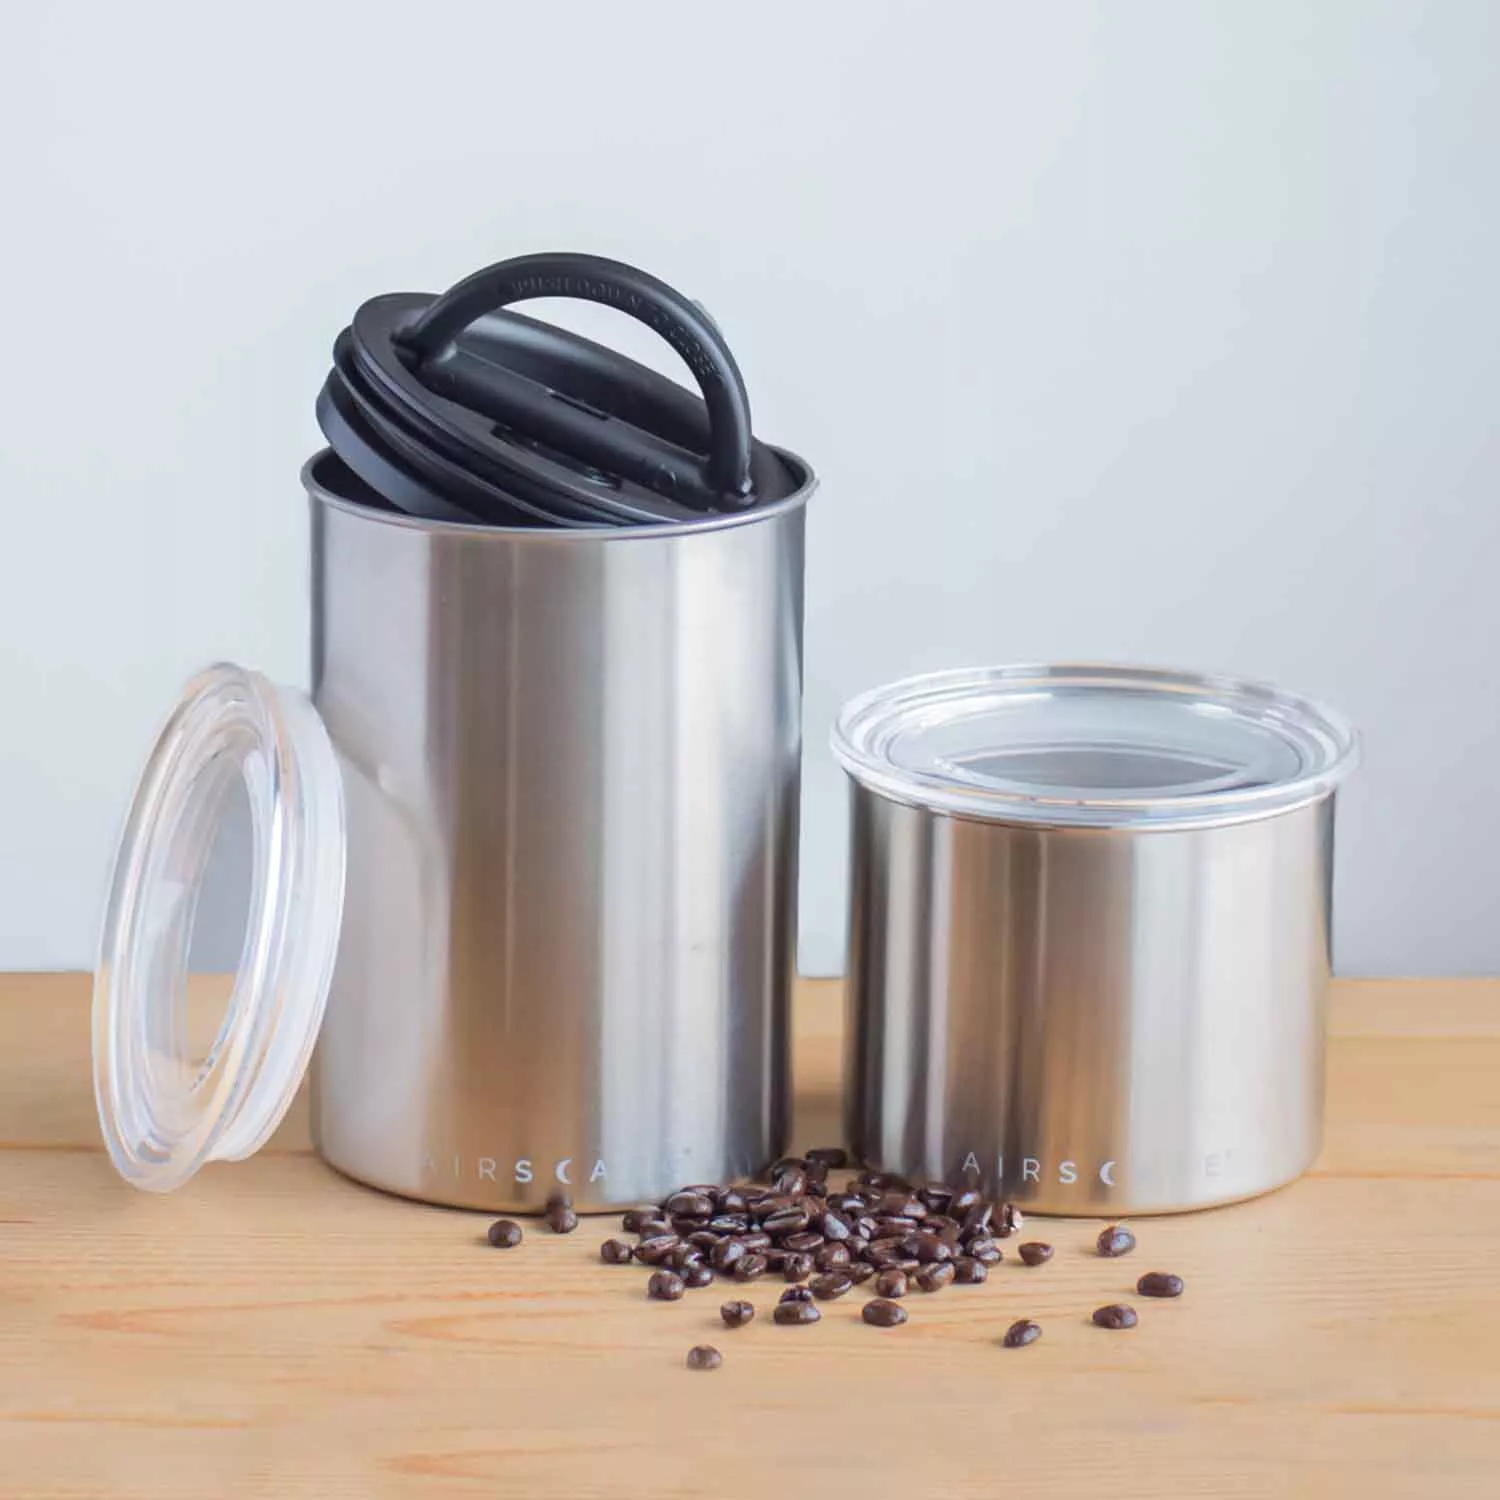 Airscape Coffee Canister, 7